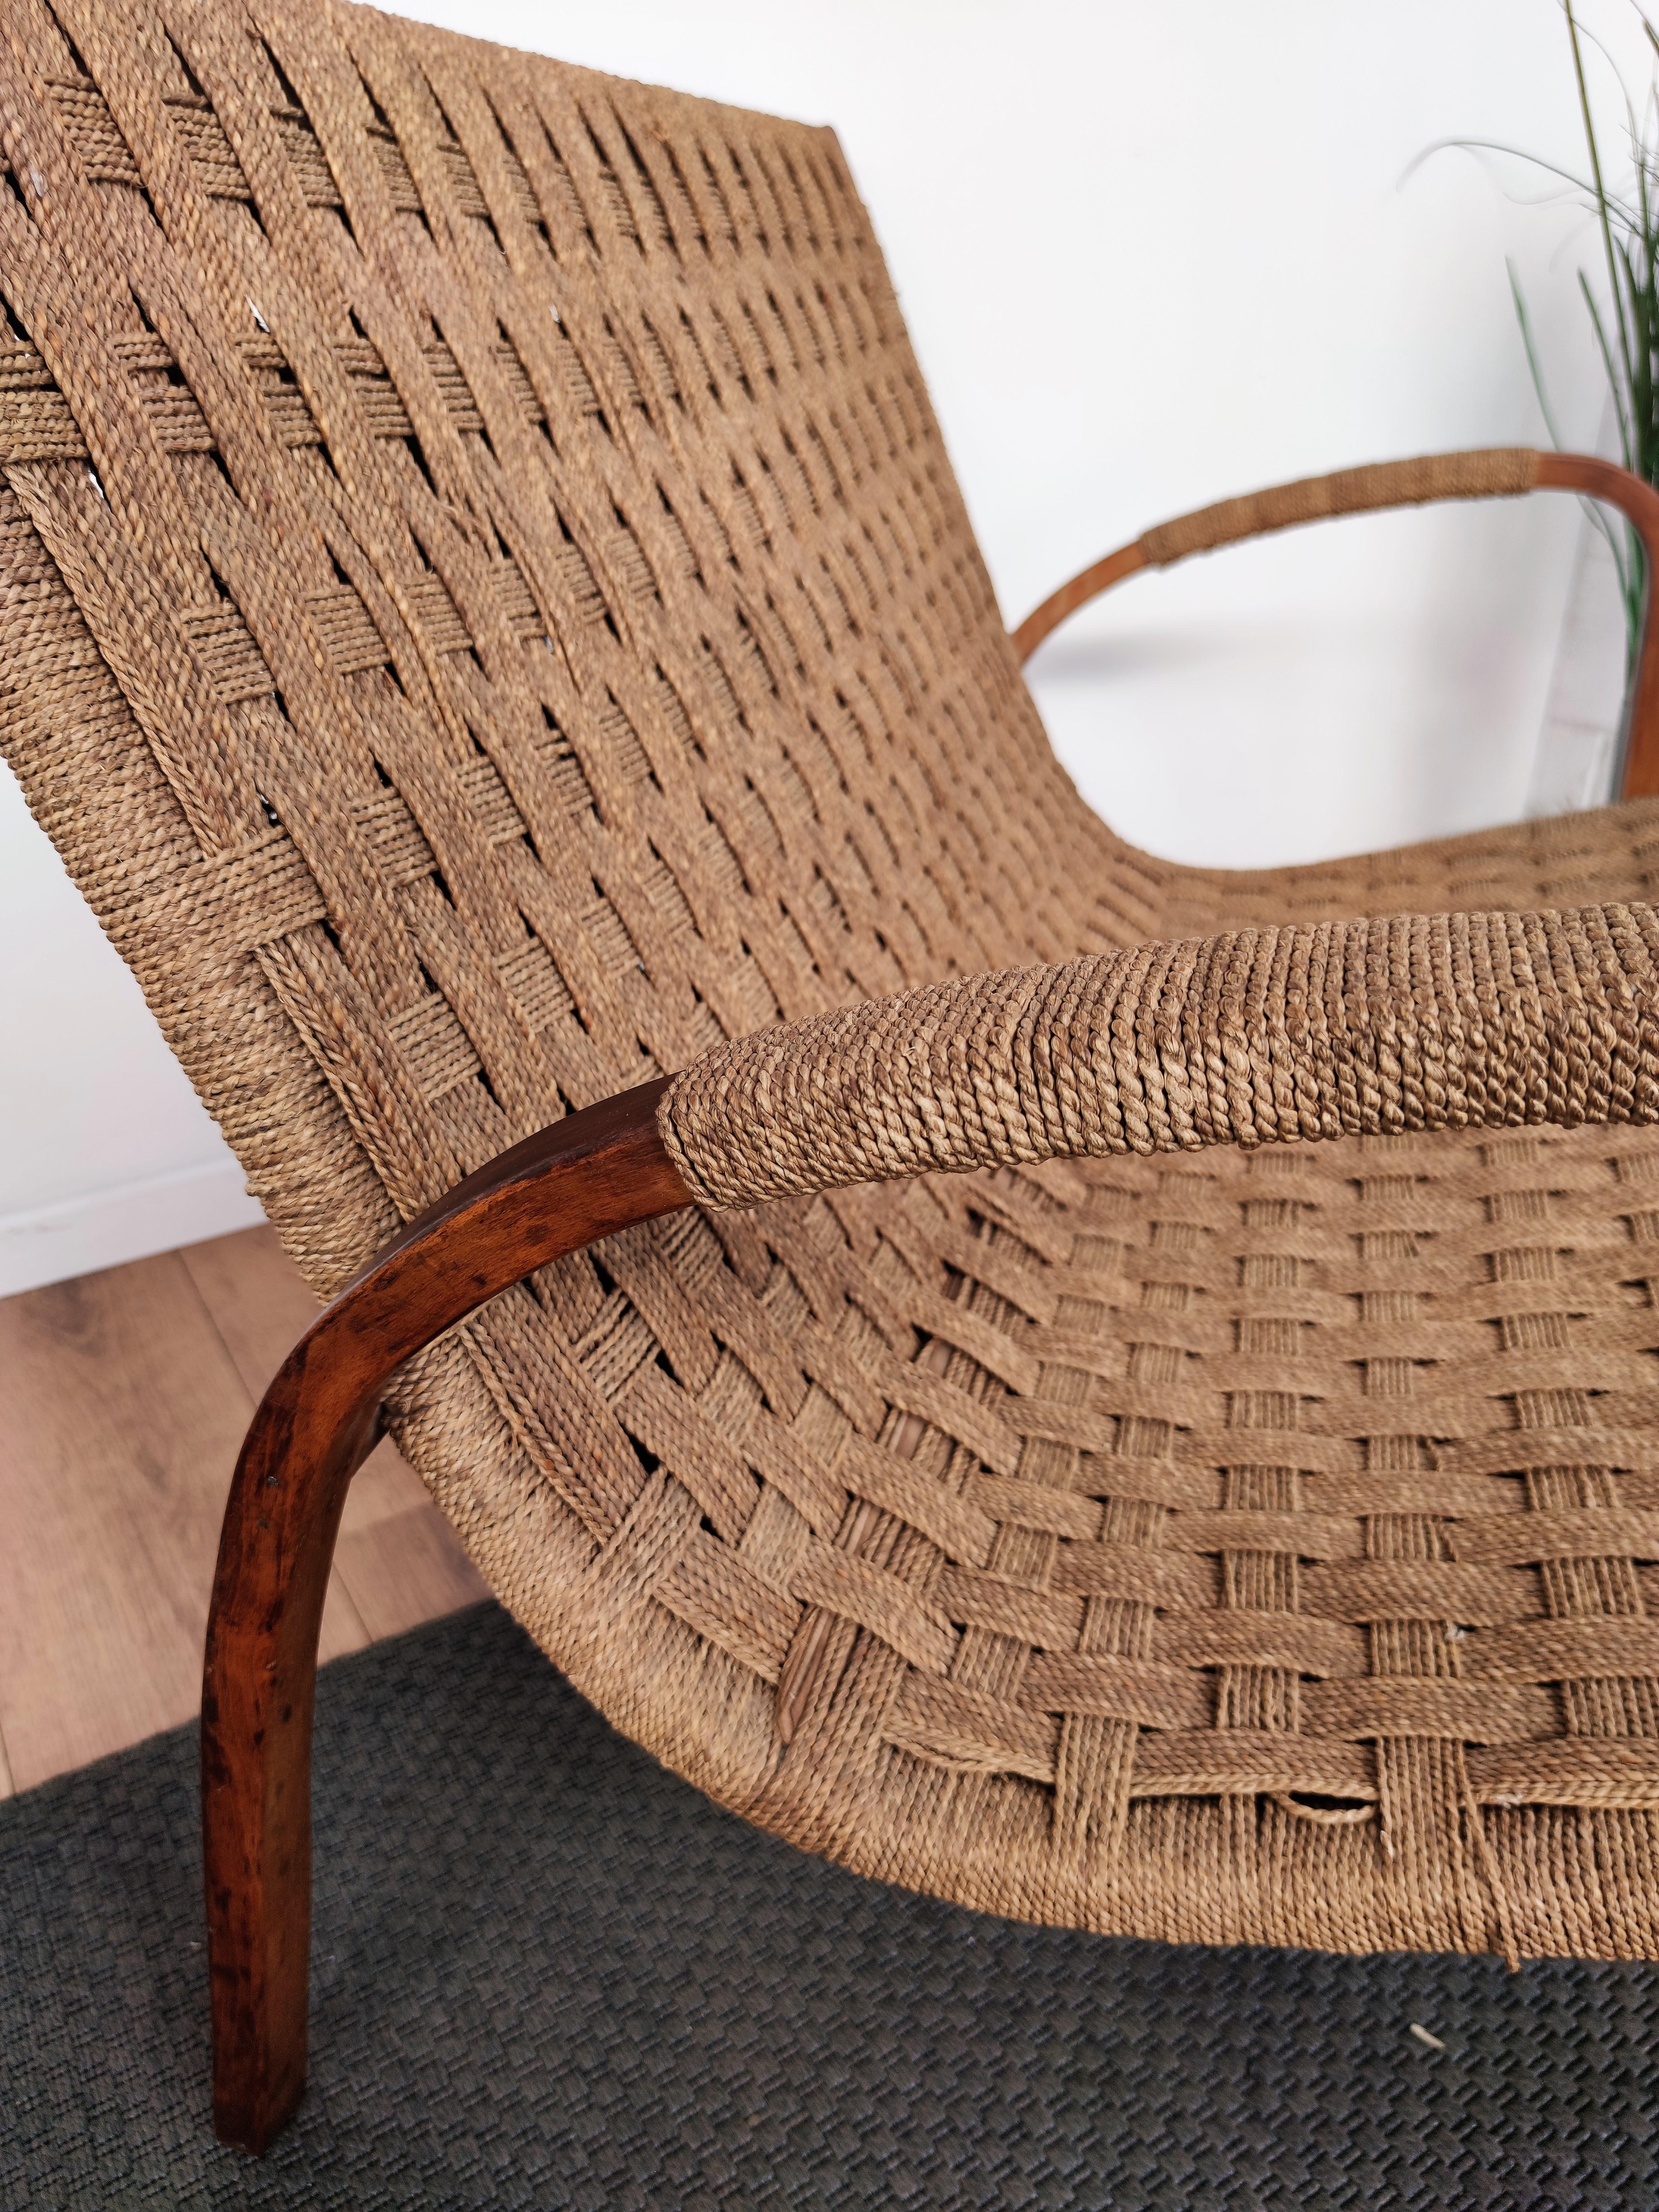 1960s Italian Midcentury Wood and Cord Woven Rope Lounge Bench Armchair In Good Condition For Sale In Carimate, Como